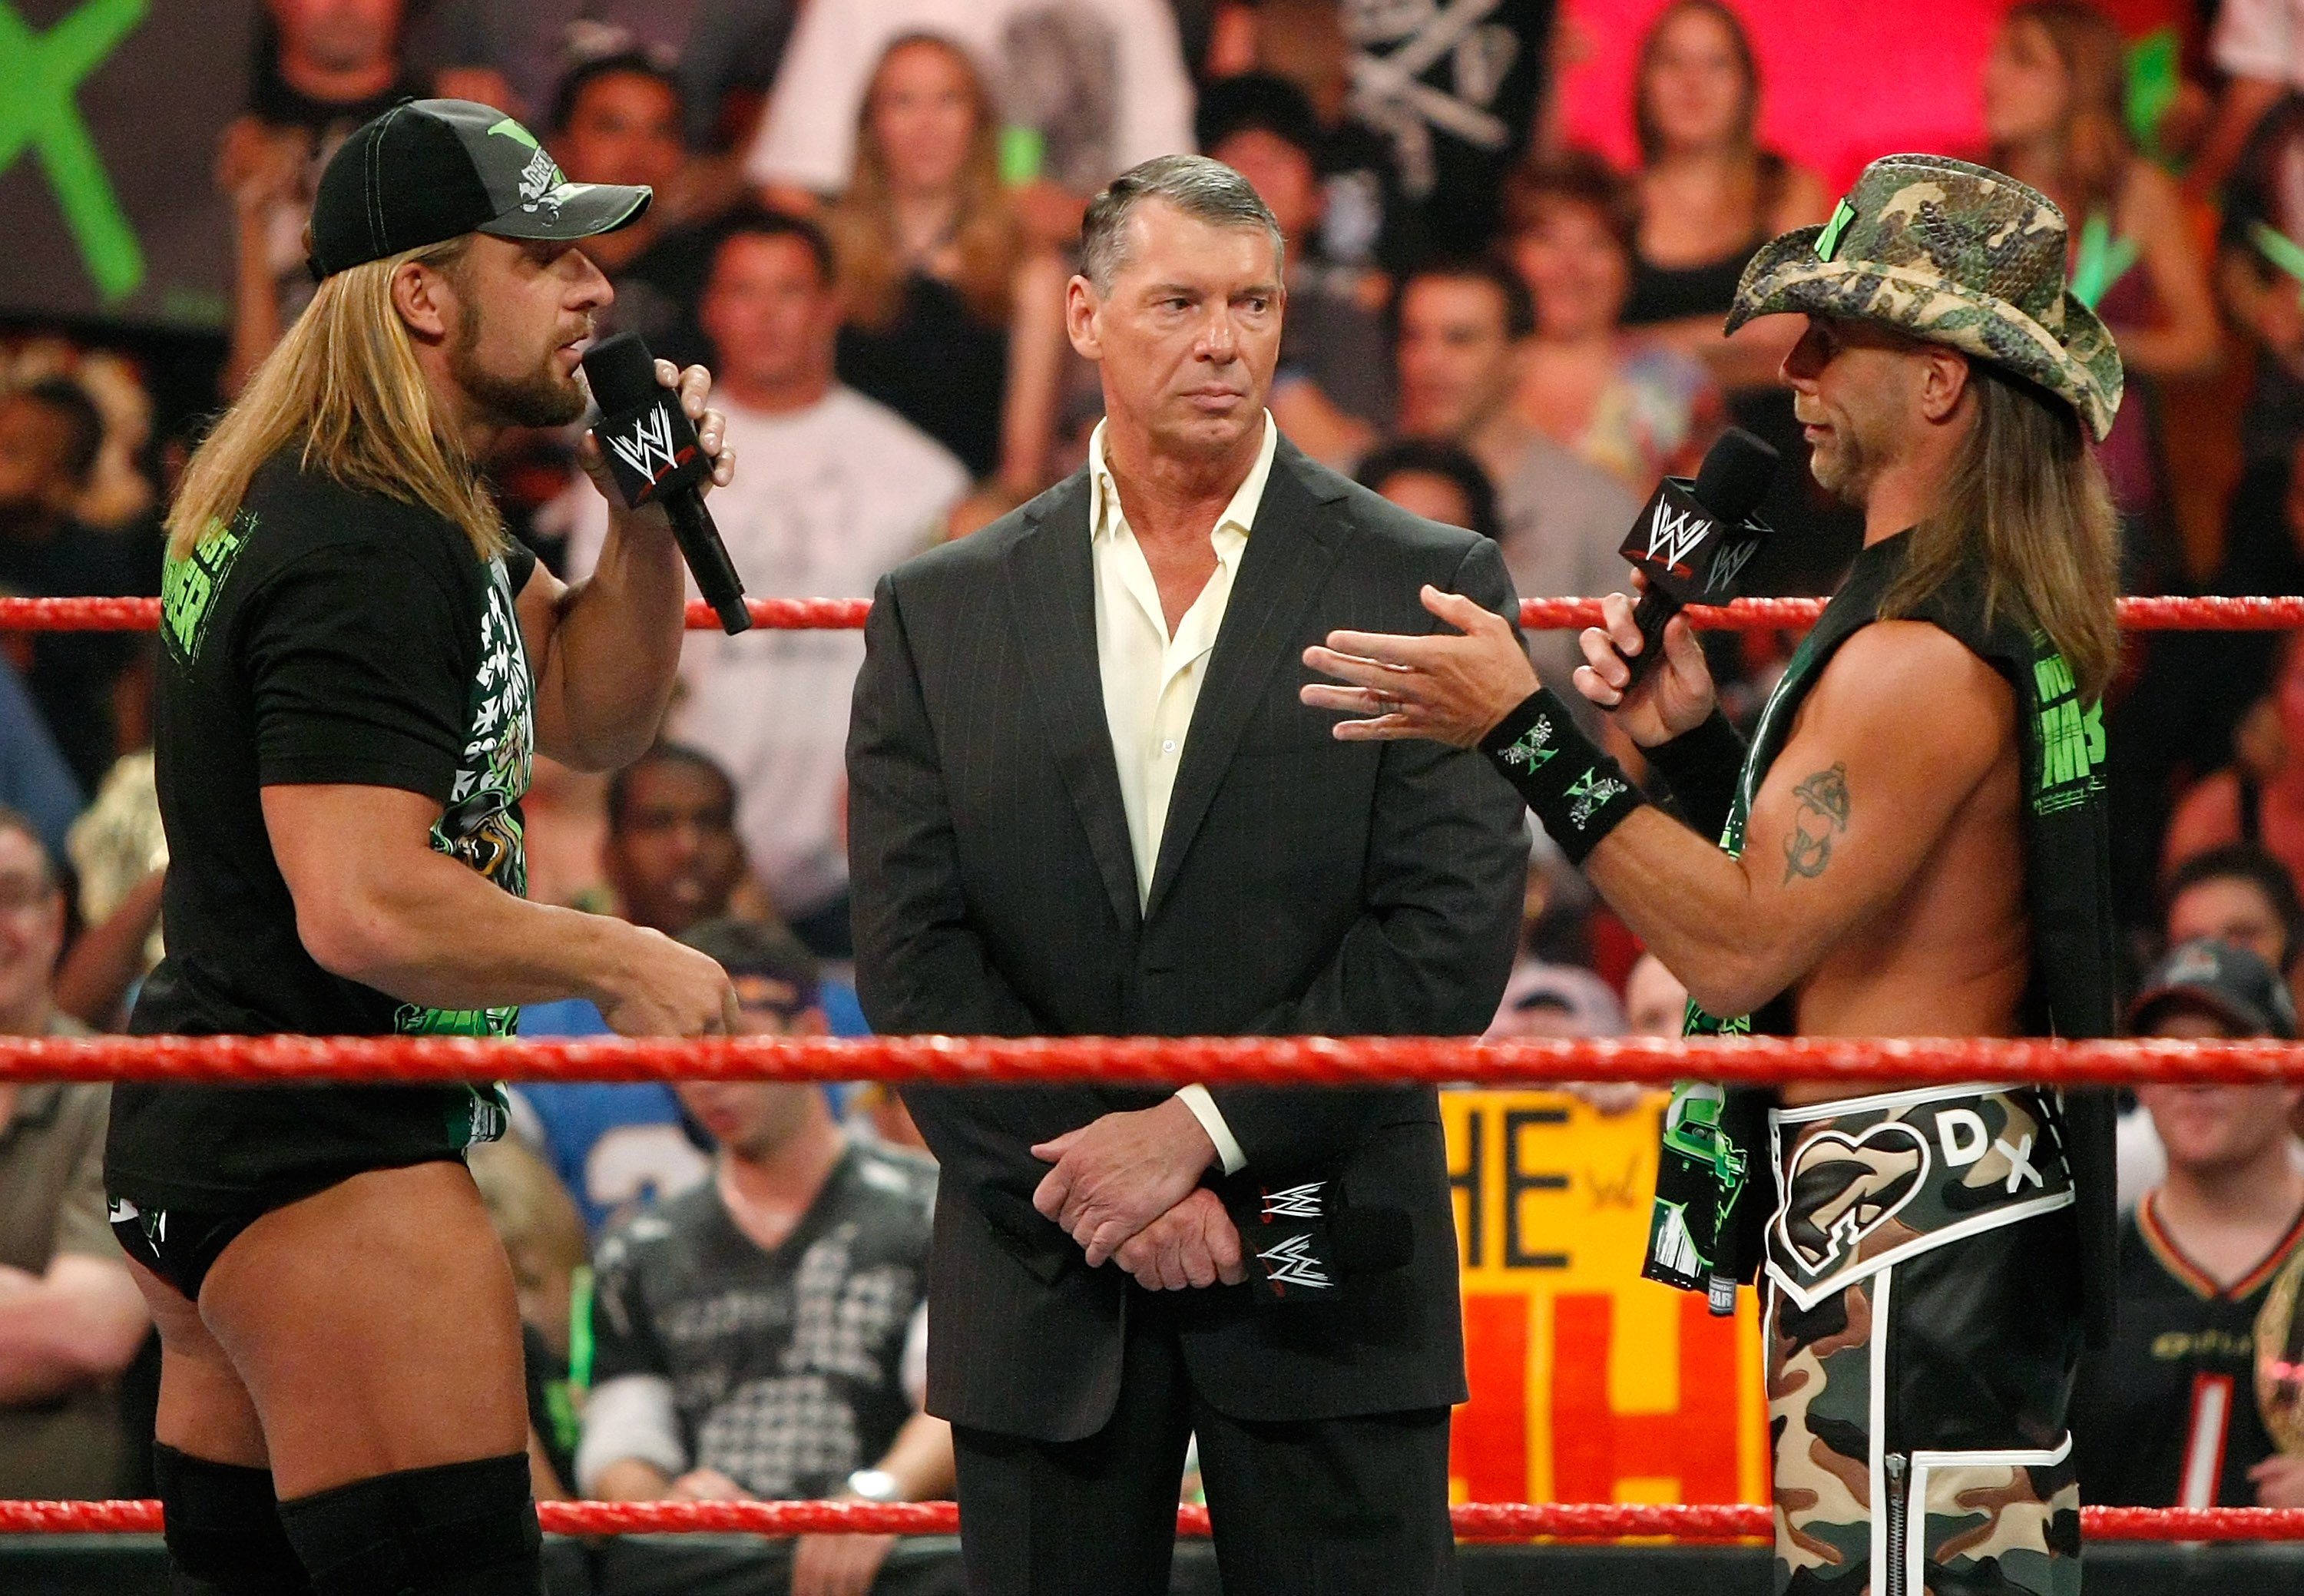 Shawn Michaels’ Most Controversial RAW Moments; WWE Canvas 2 Canvas (VIDEO)